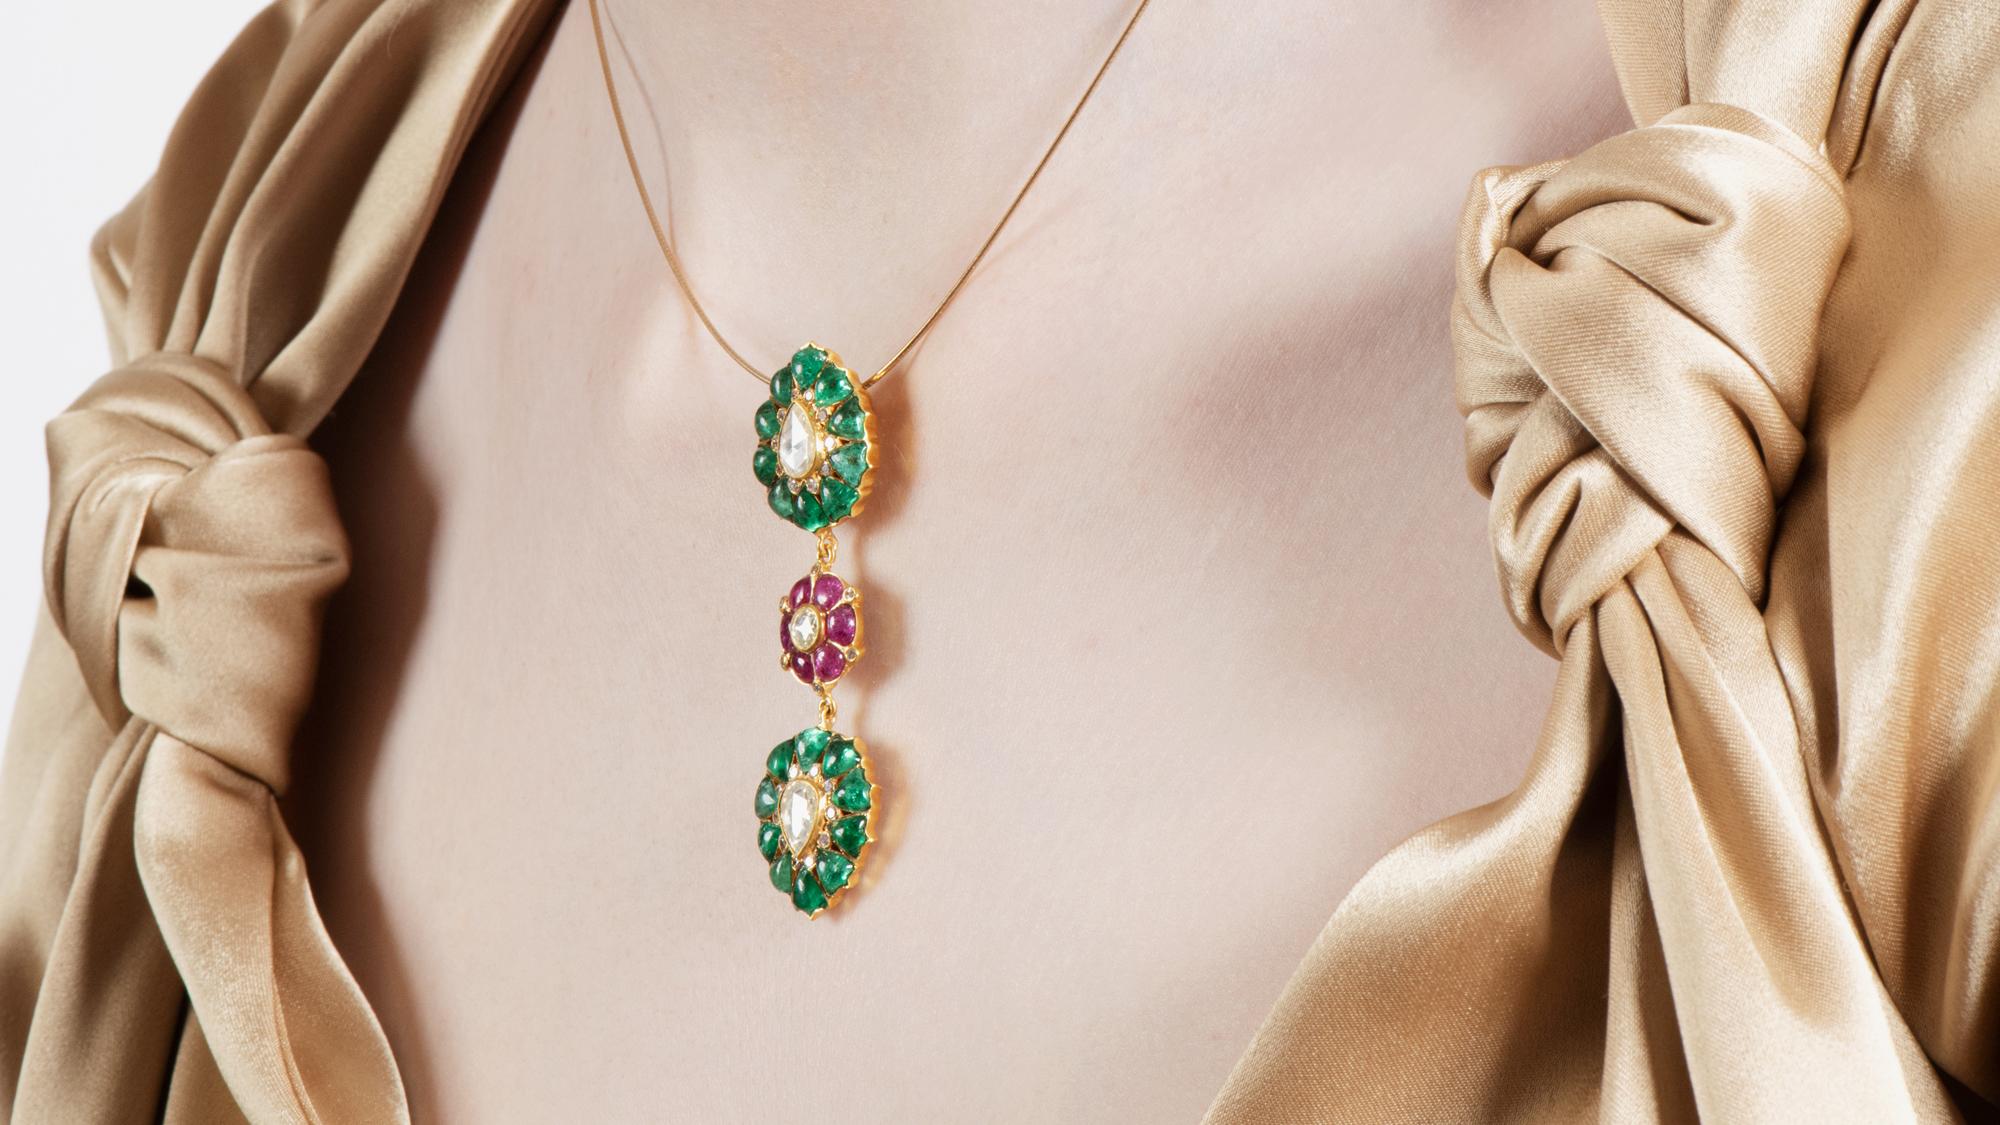 Diamond weight: 0.35 carats
Rose-cut Diamond weight: 1.30 carats
Emerald weight: 6 carats 
Ruby weight: 1.80 carats

An homage to precious coloured stones - this exquisite pendant is handmade from 18k yellow gold and features a beautifully crafted